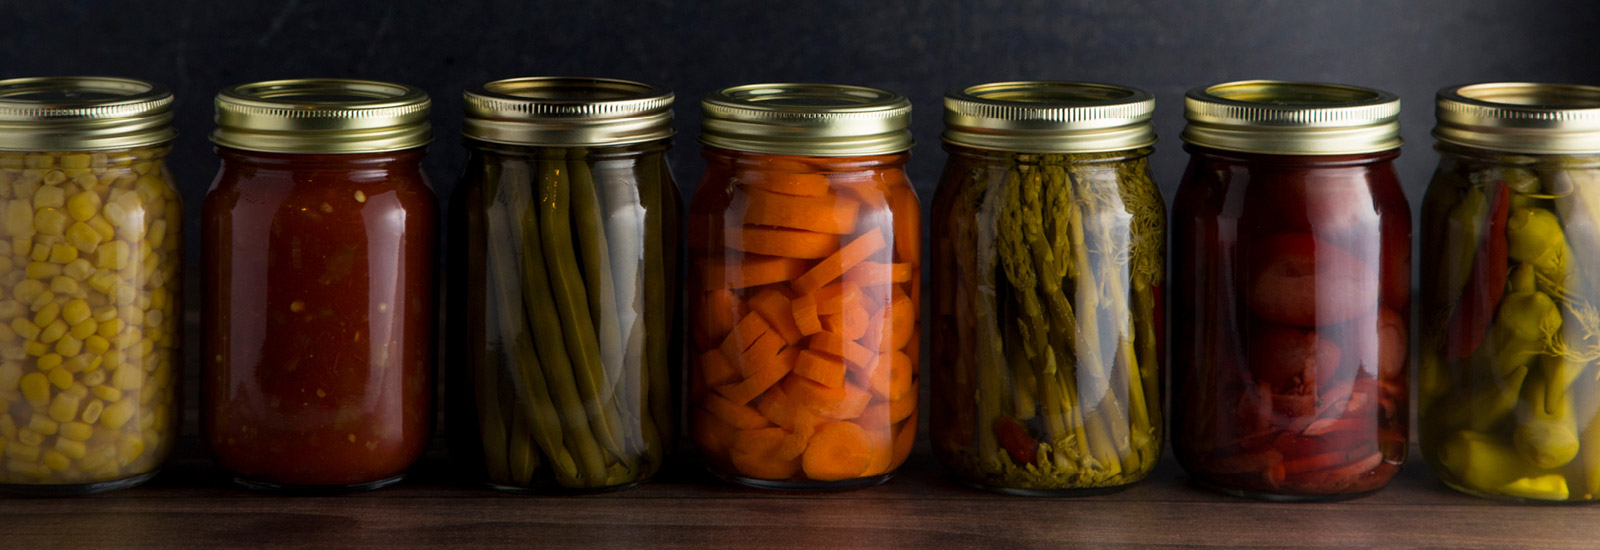 Save on canning supplies during our Canning Sale August 7-20.